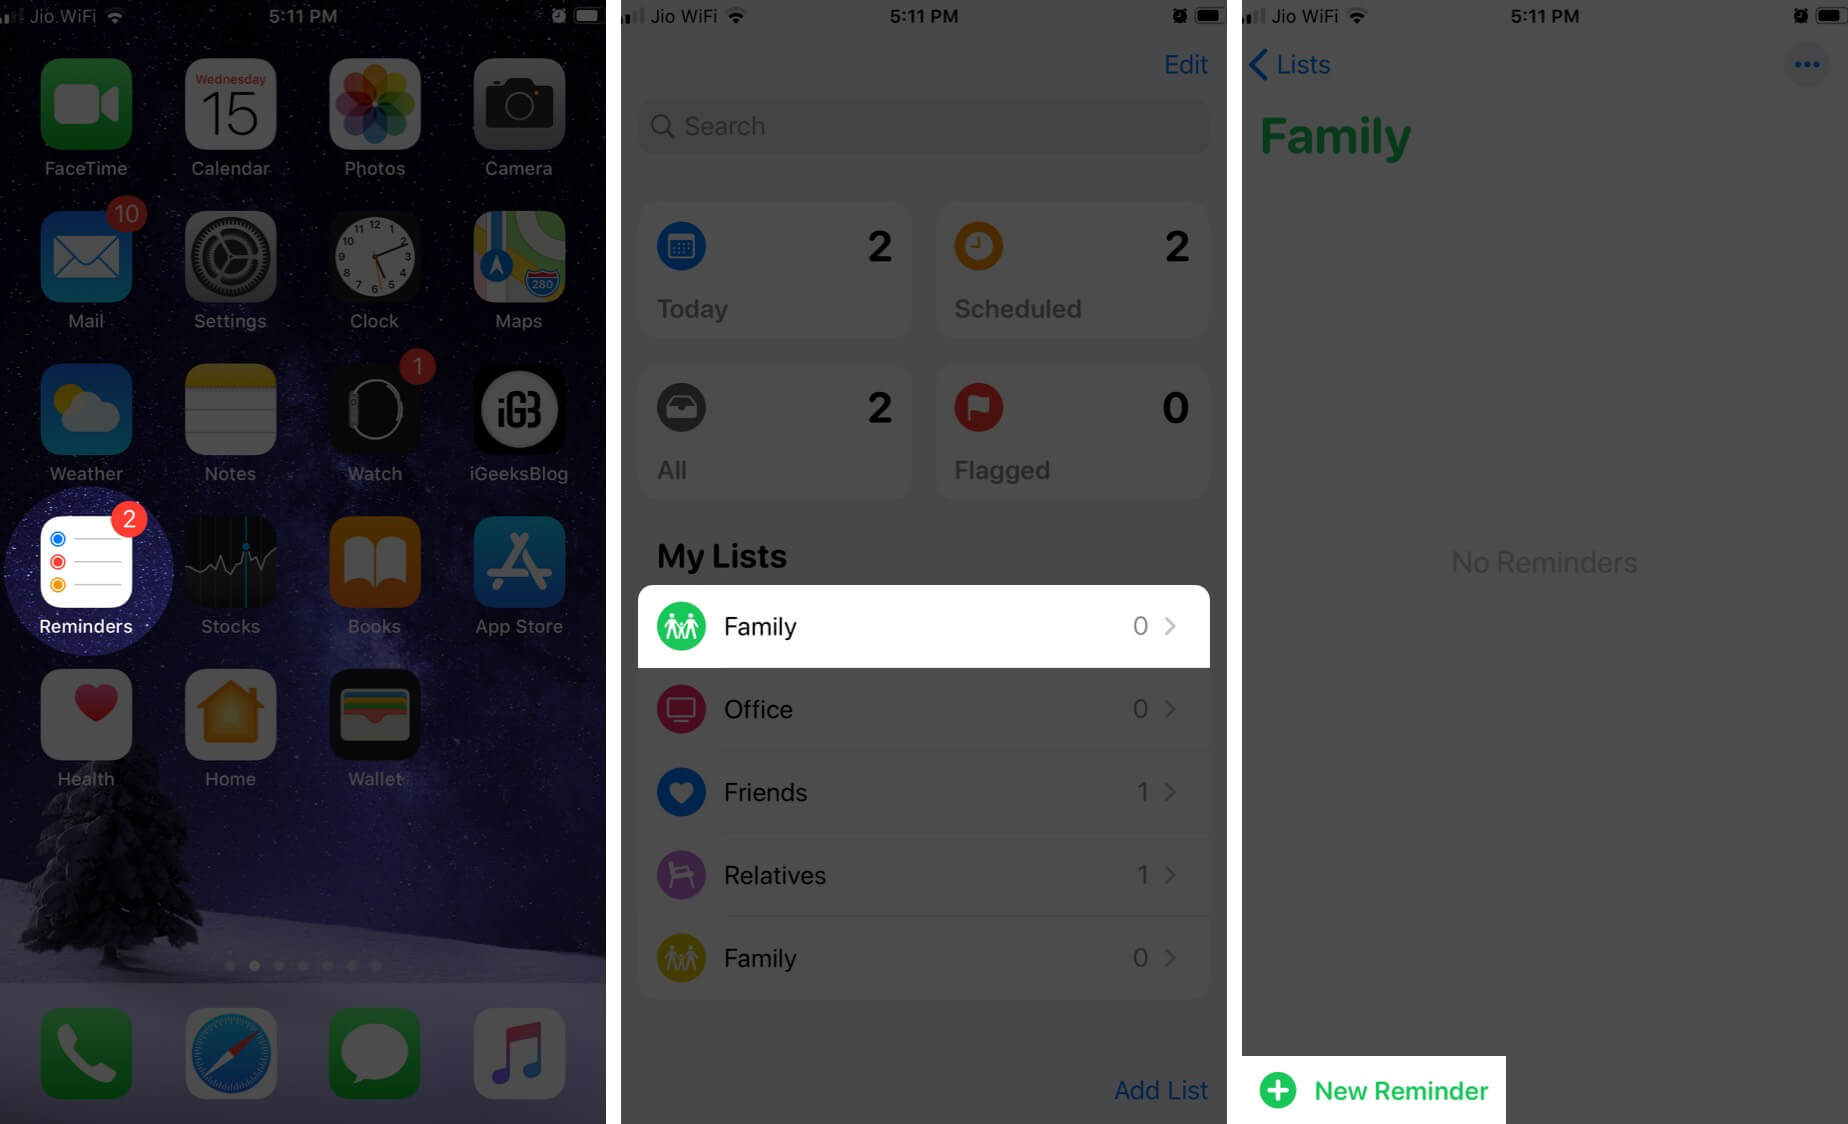 Open Reminders Select List and Tap on New Reminders on iPhone